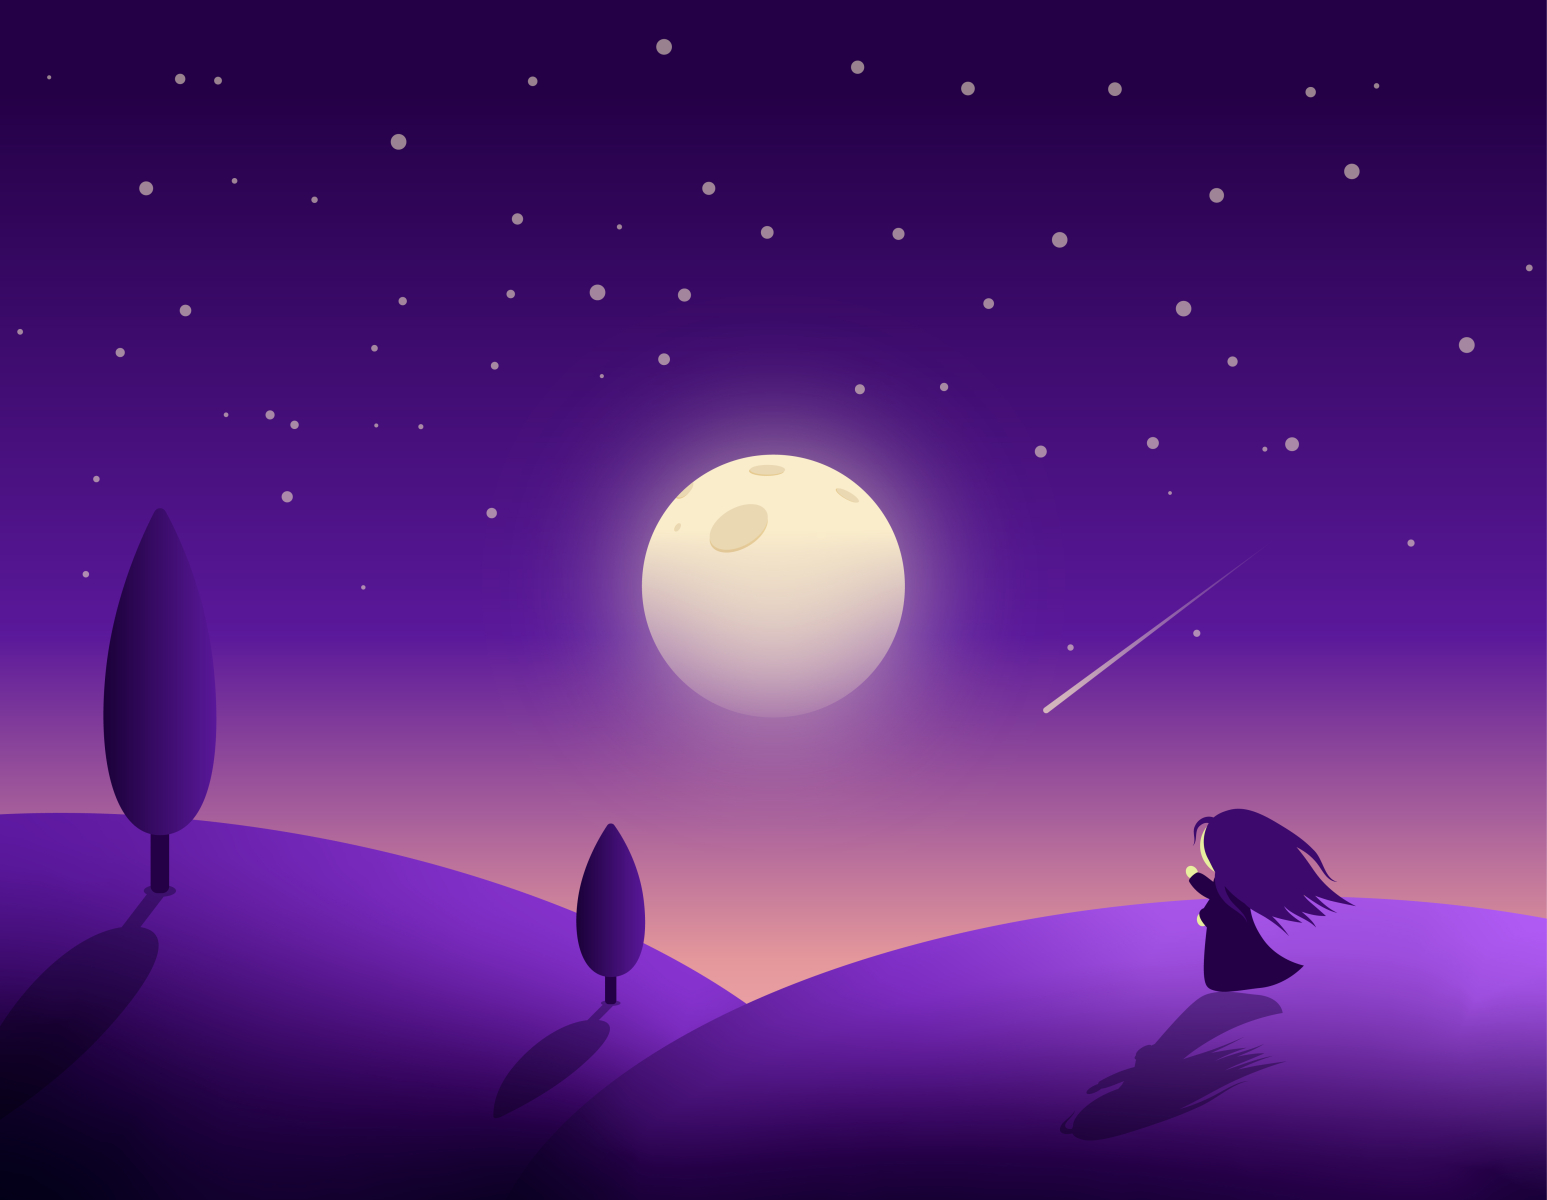 Starlit Night by Kammerel on Dribbble